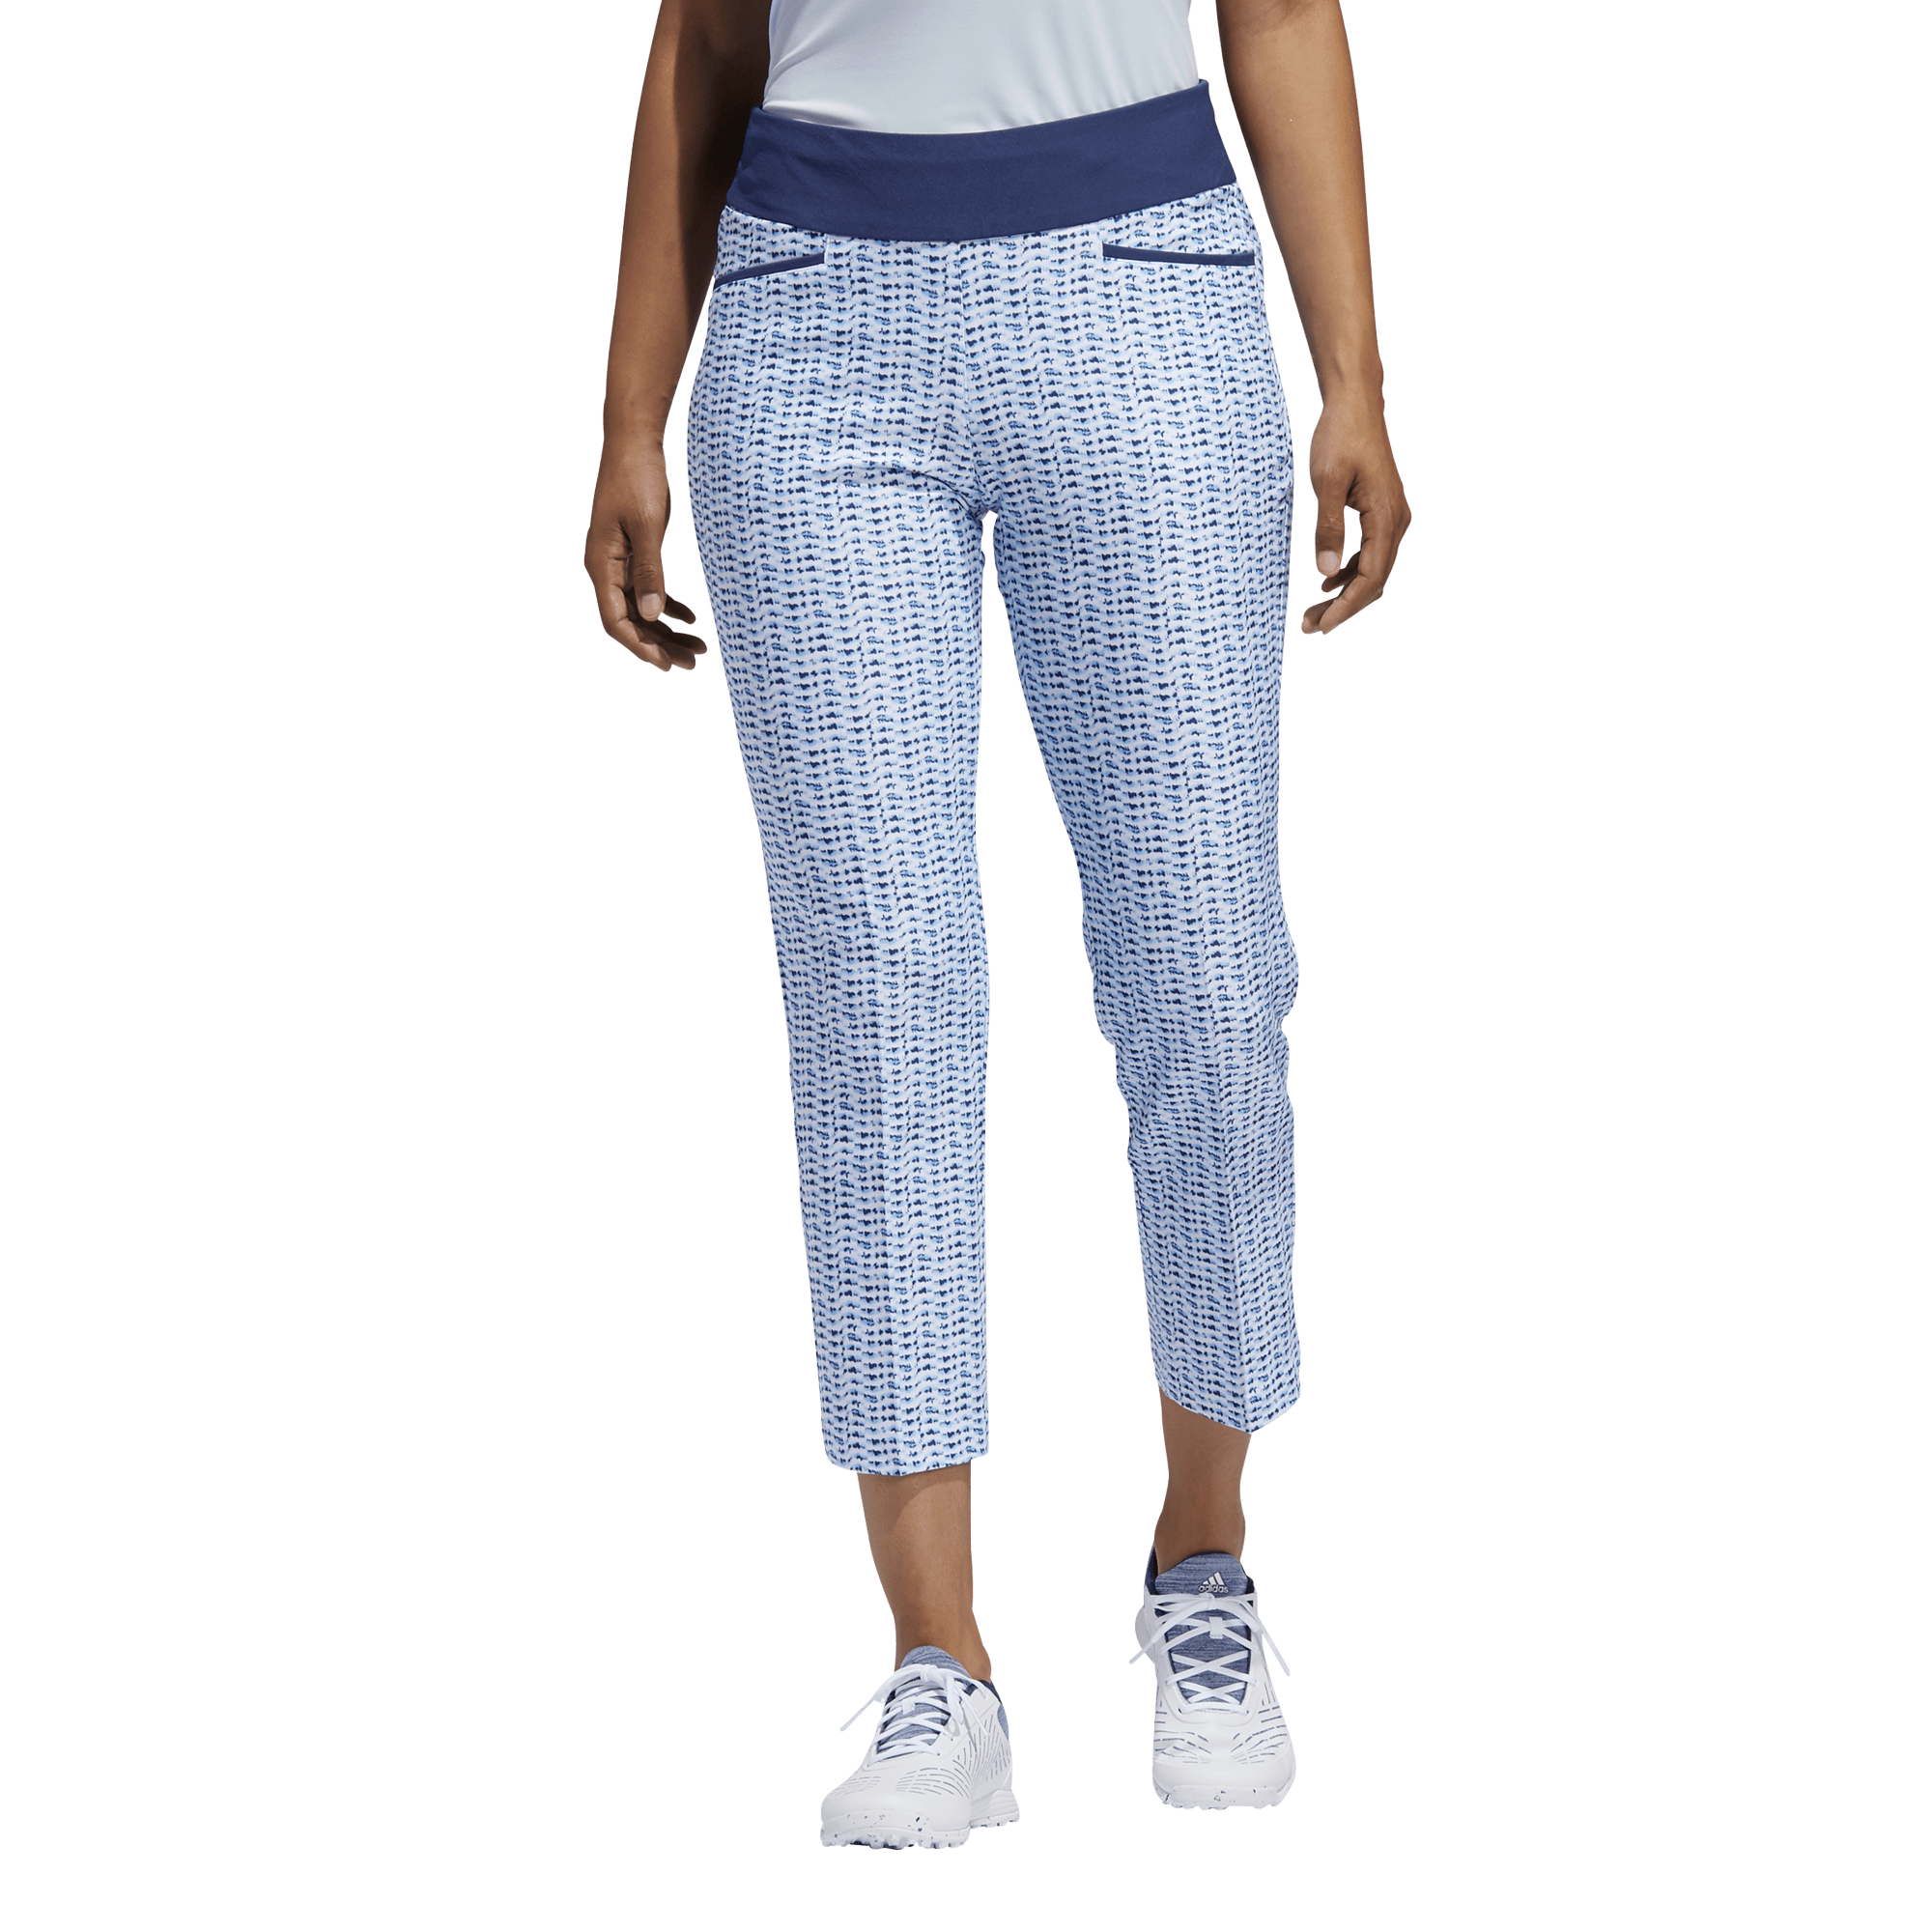 adidas pull on ankle pant